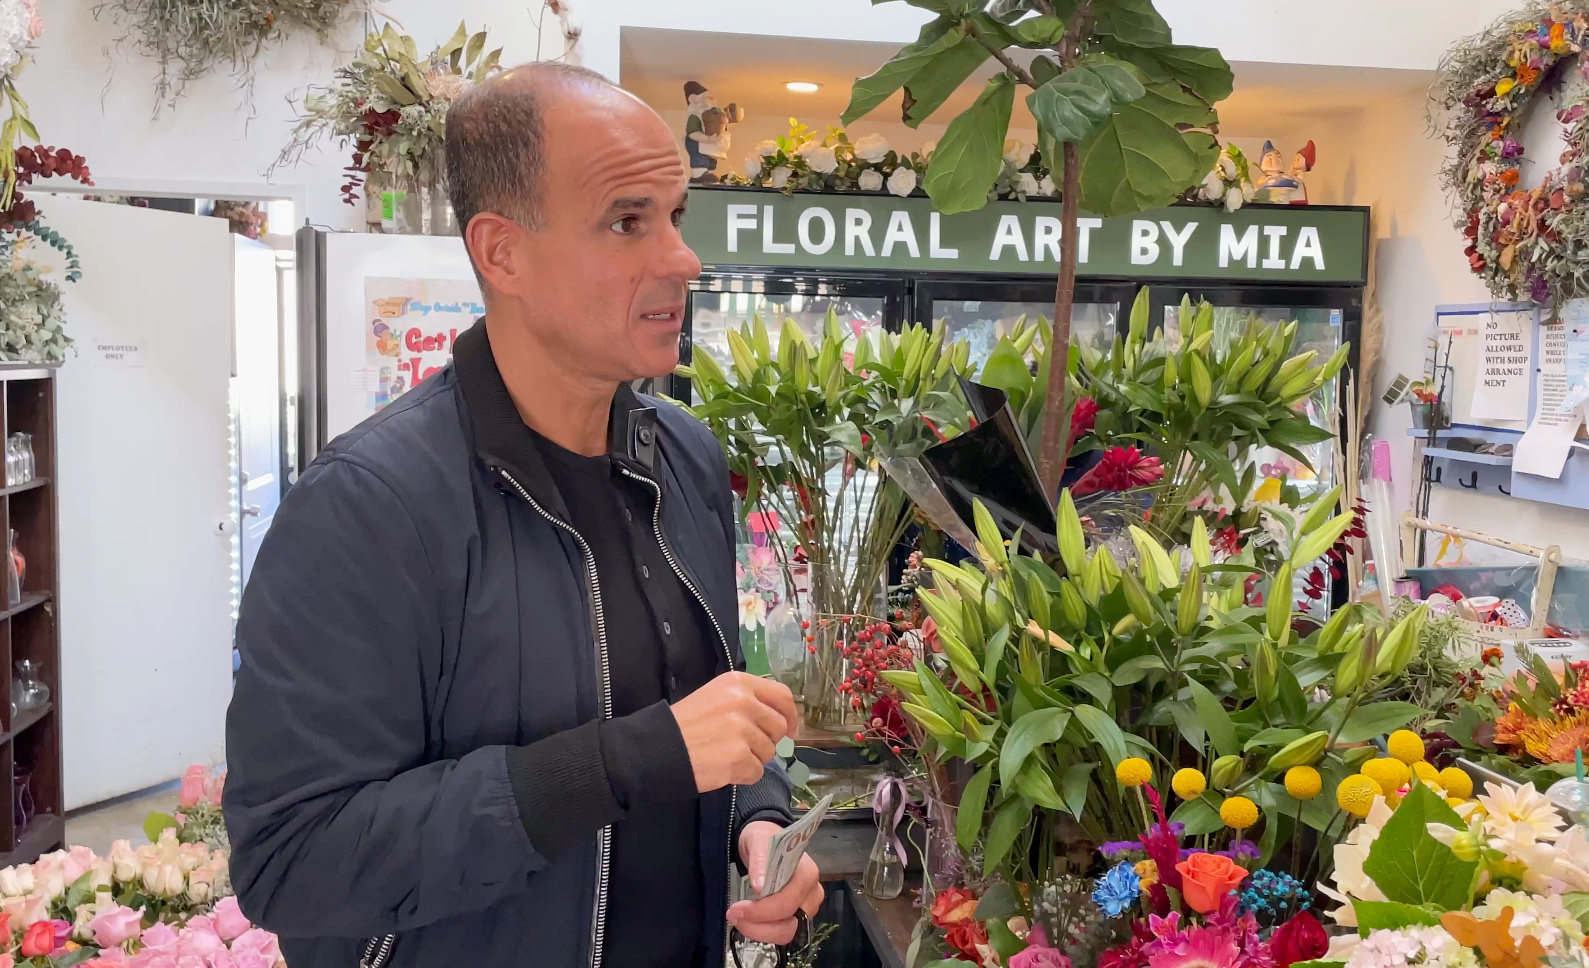 Marcus Lemonis, The Fixer, speaking to owner of floral shop business